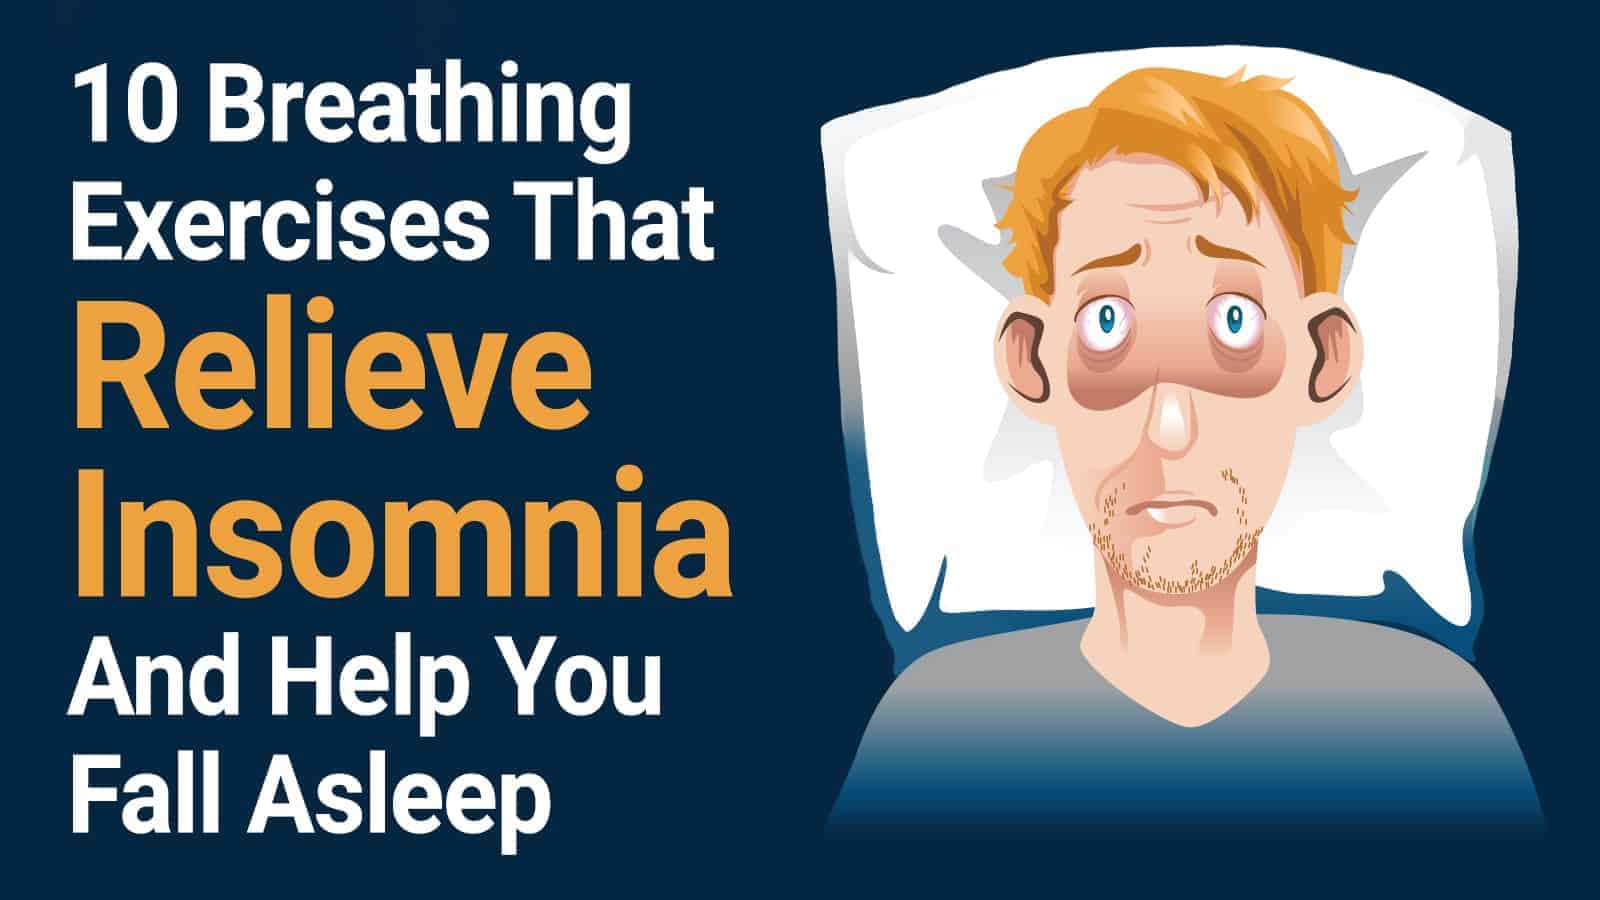 10 Breathing Exercises That Relieve insomnia And Help You Fall Asleep